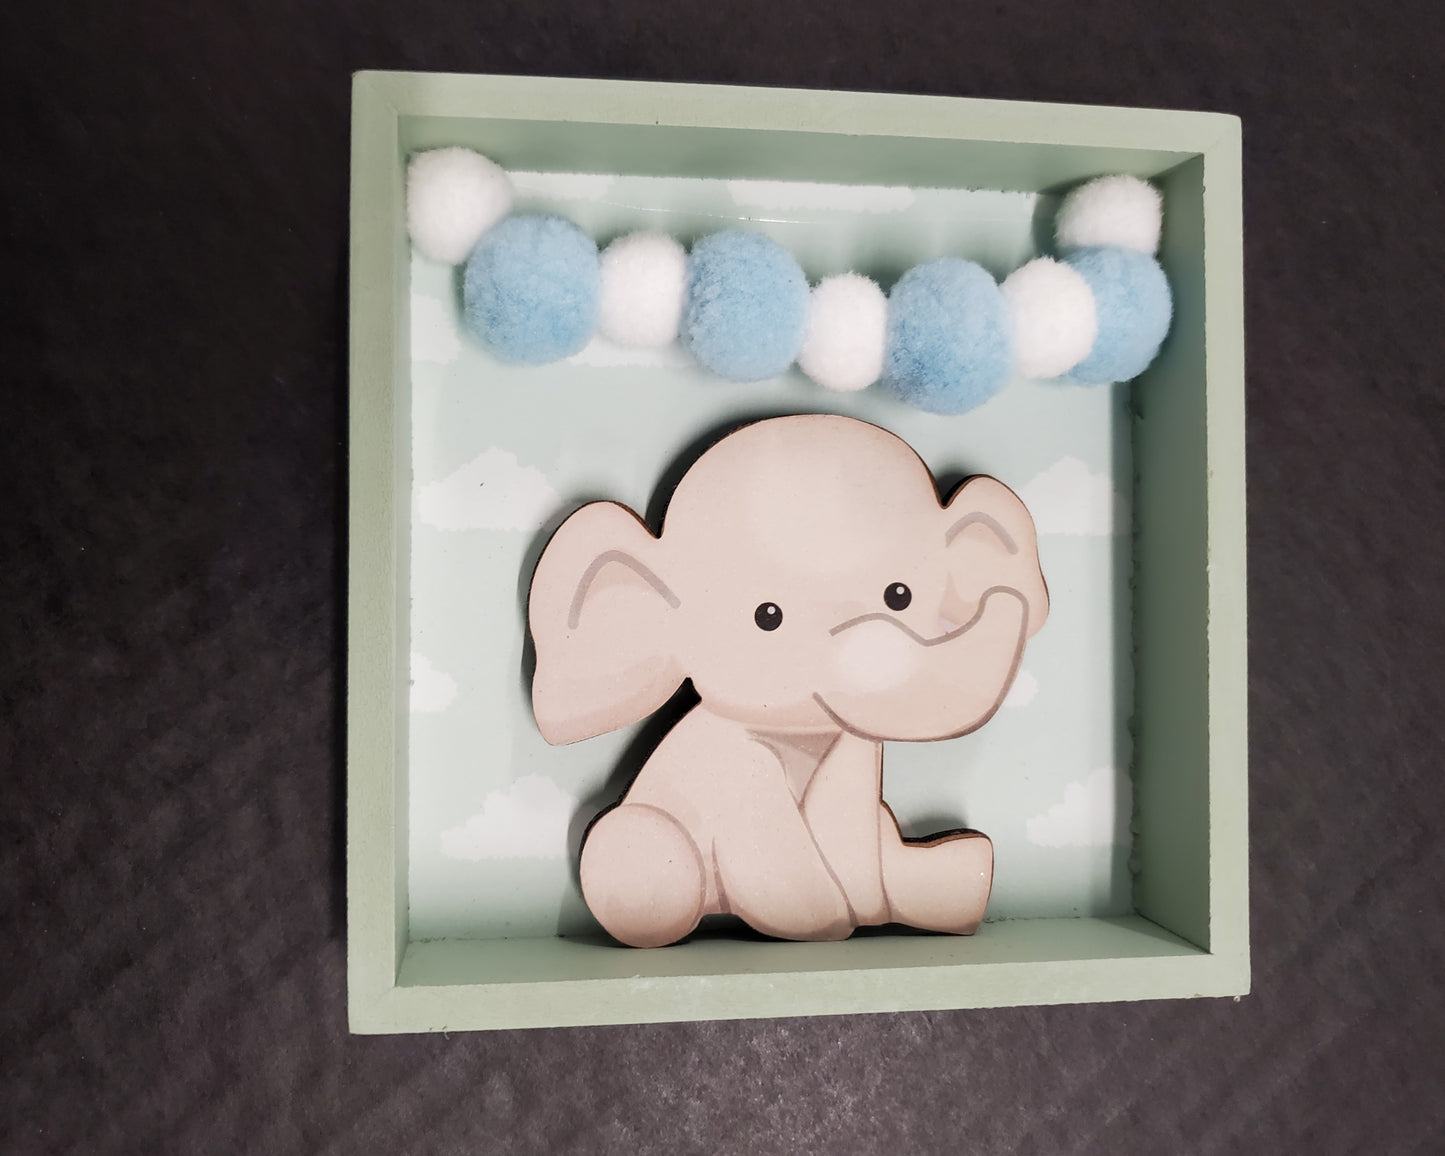 Sweet Elephant with Pom Poms on Mint Green Wall Art or Tabletop Decor Baby Room Decor